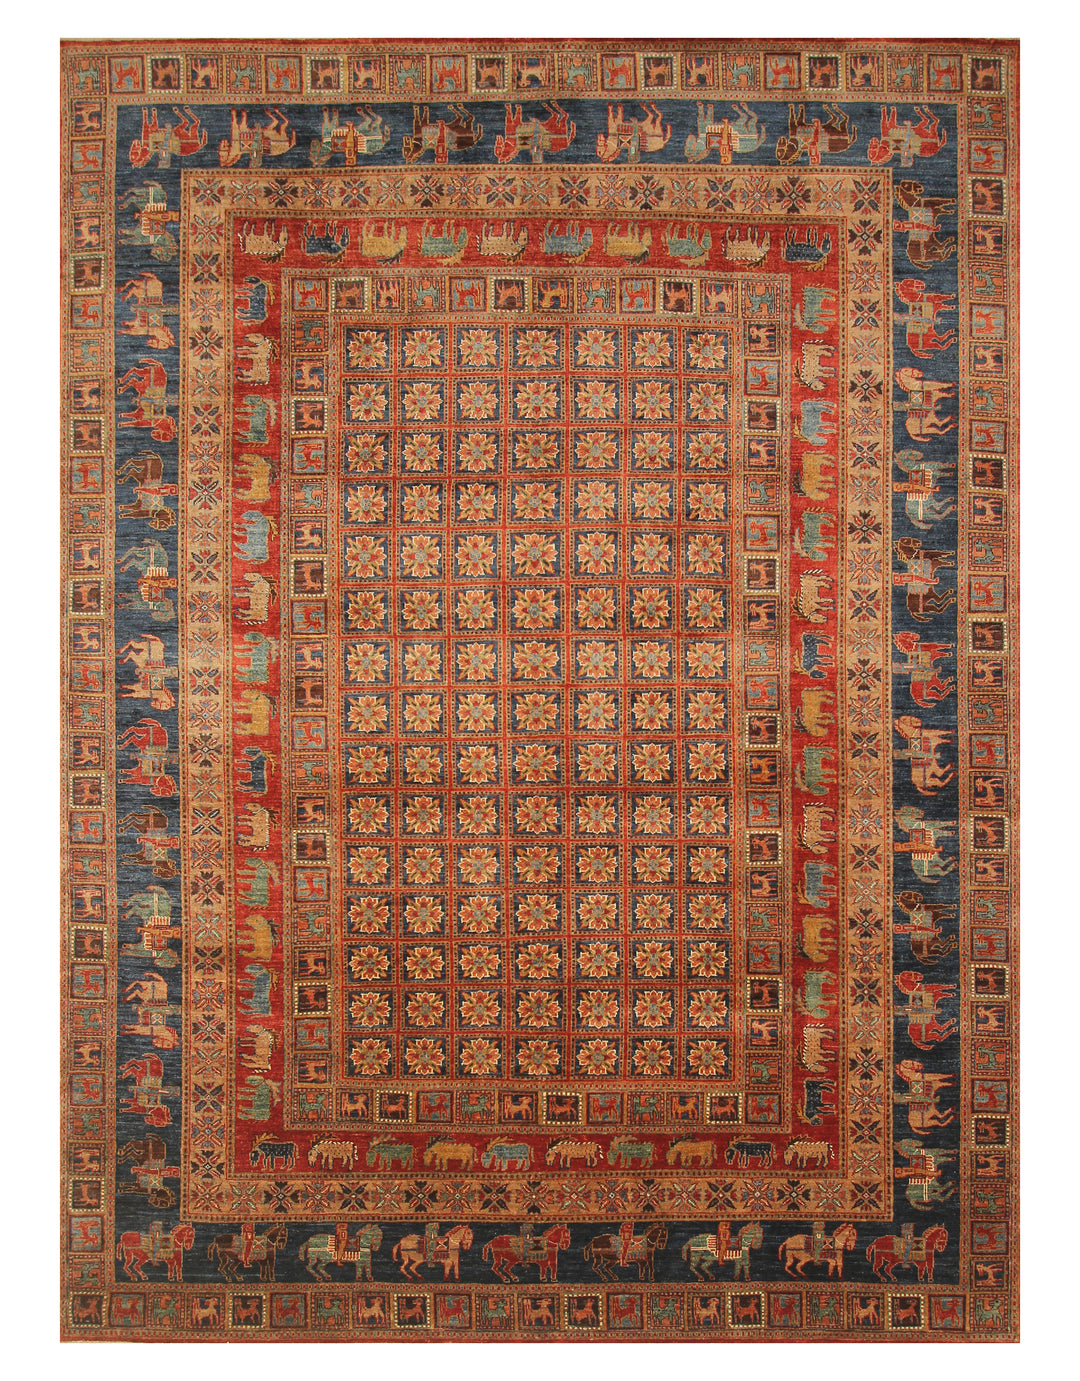 SOLD 9x12 Red Blue Tribal Pazyryk Afghan Hand Knotted Animal Rug